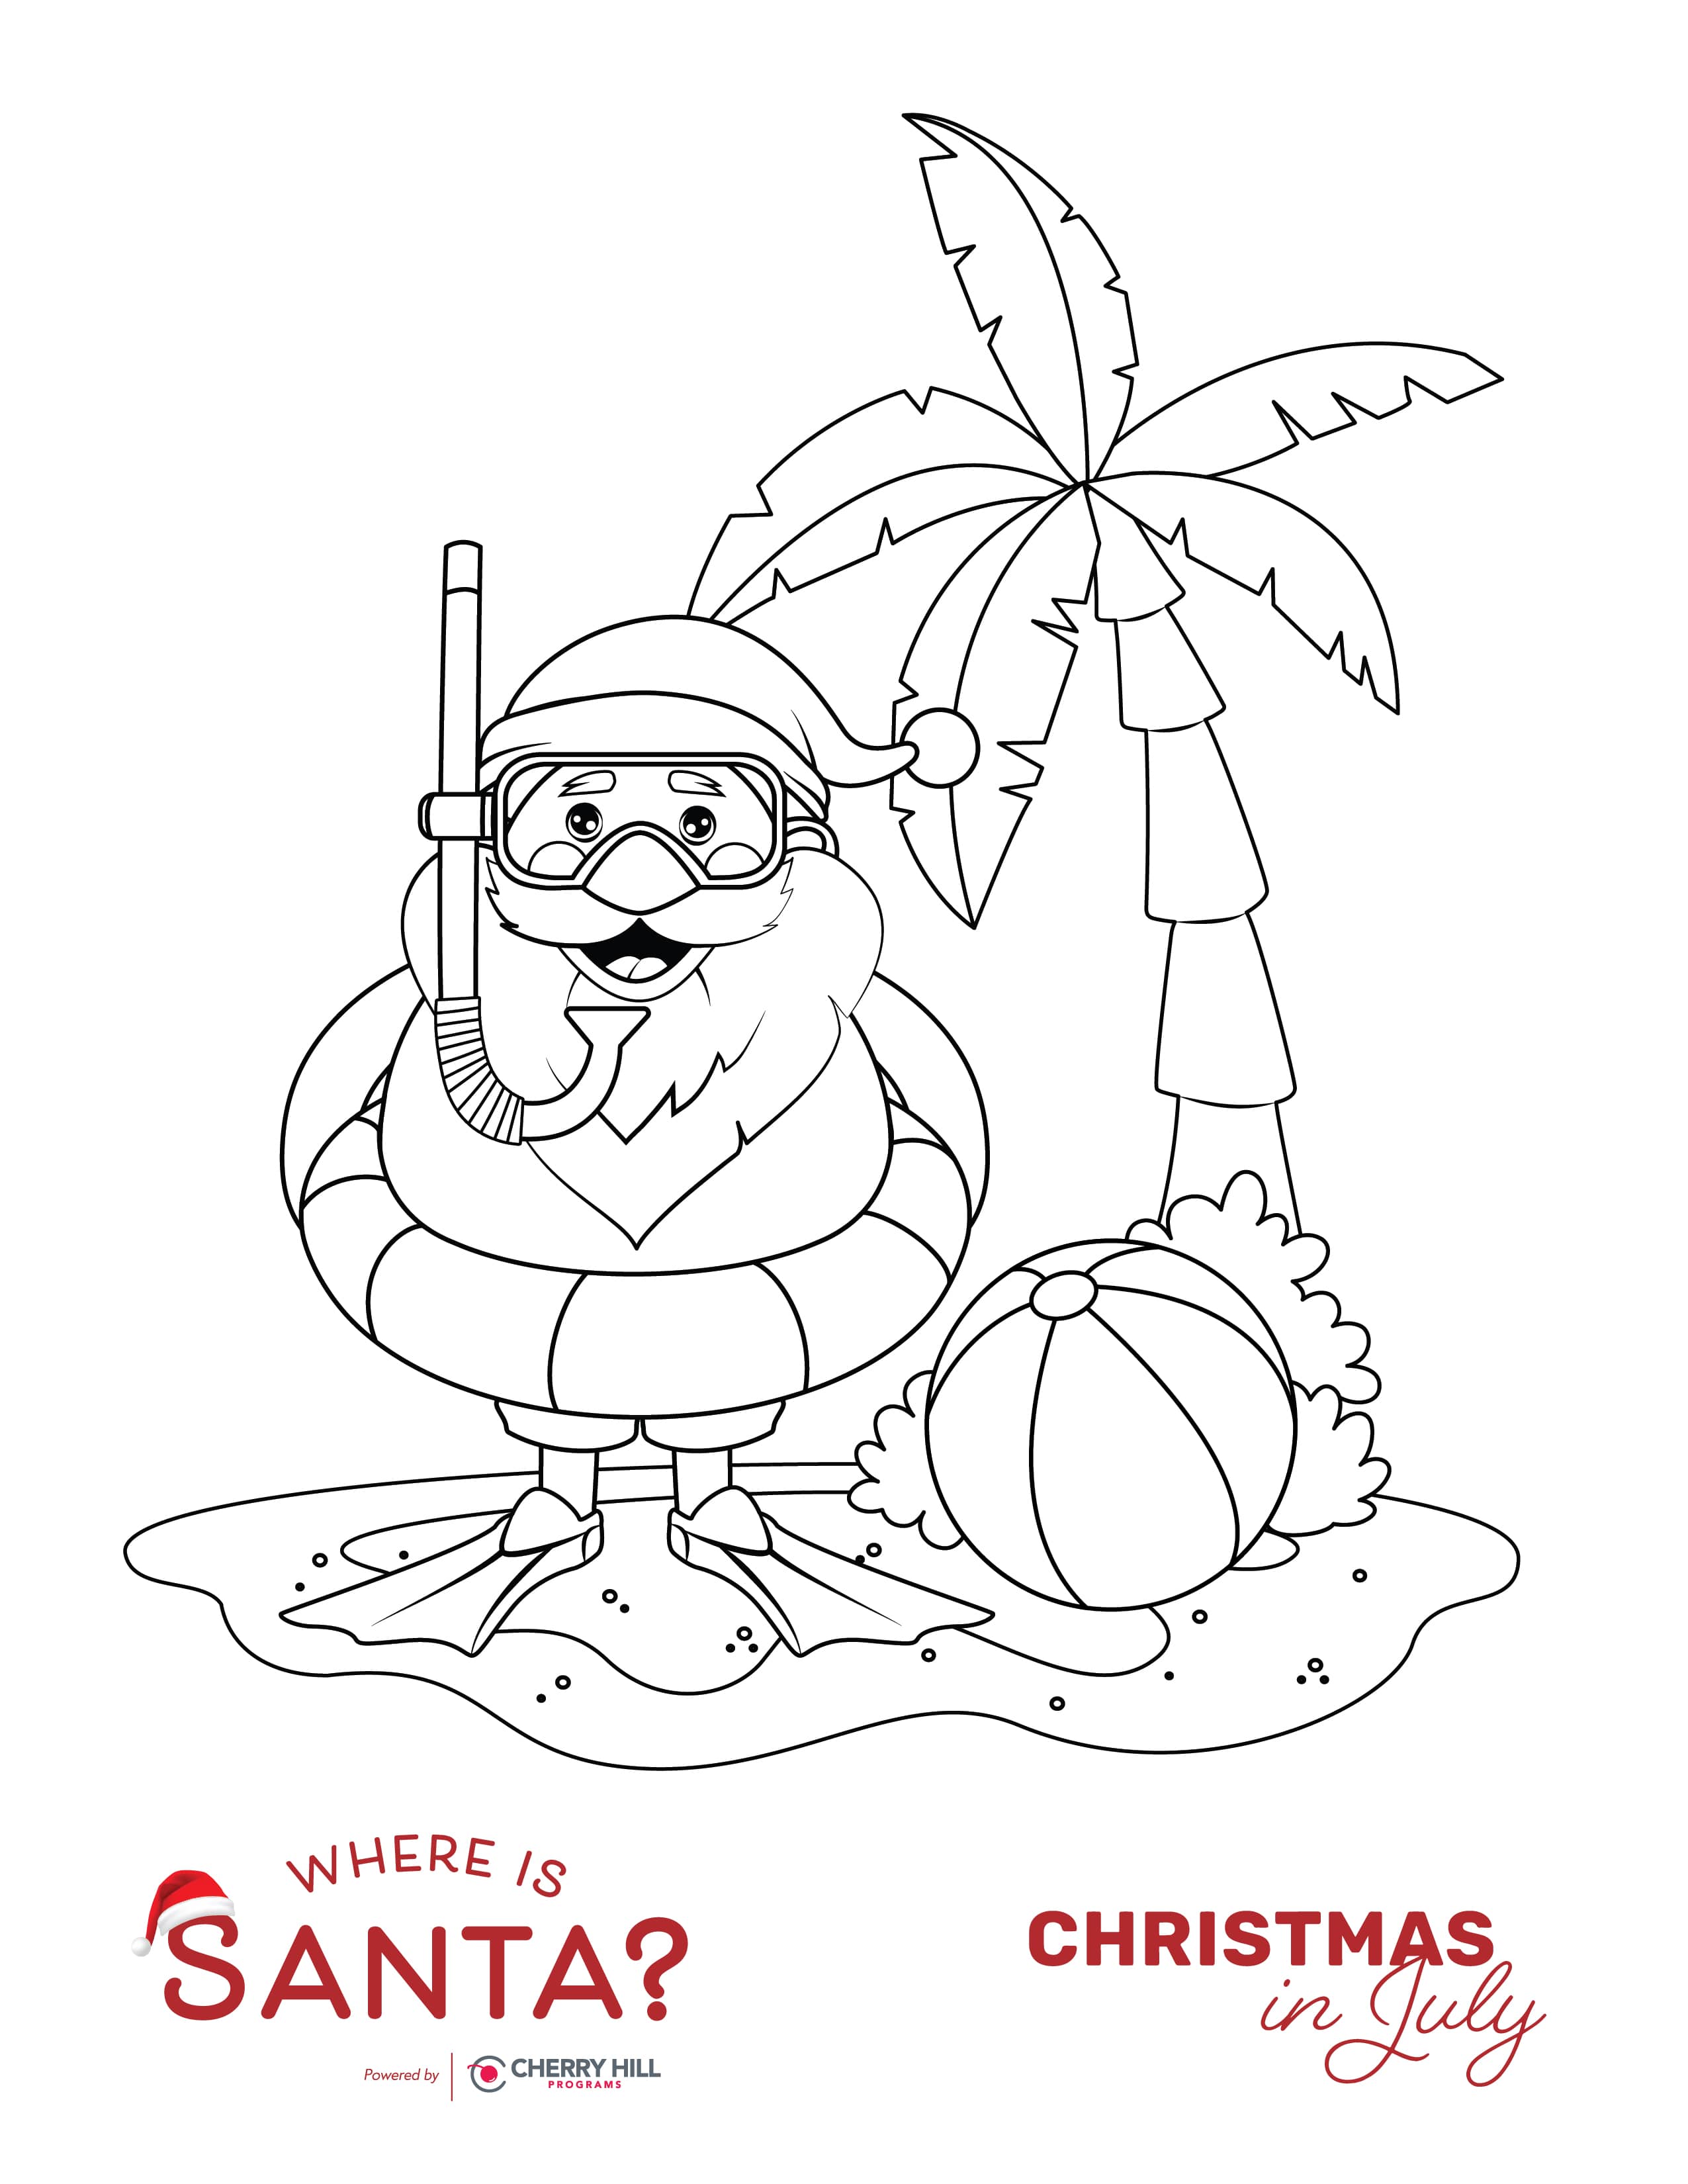 Christmas in July_Coloring Sheets-02